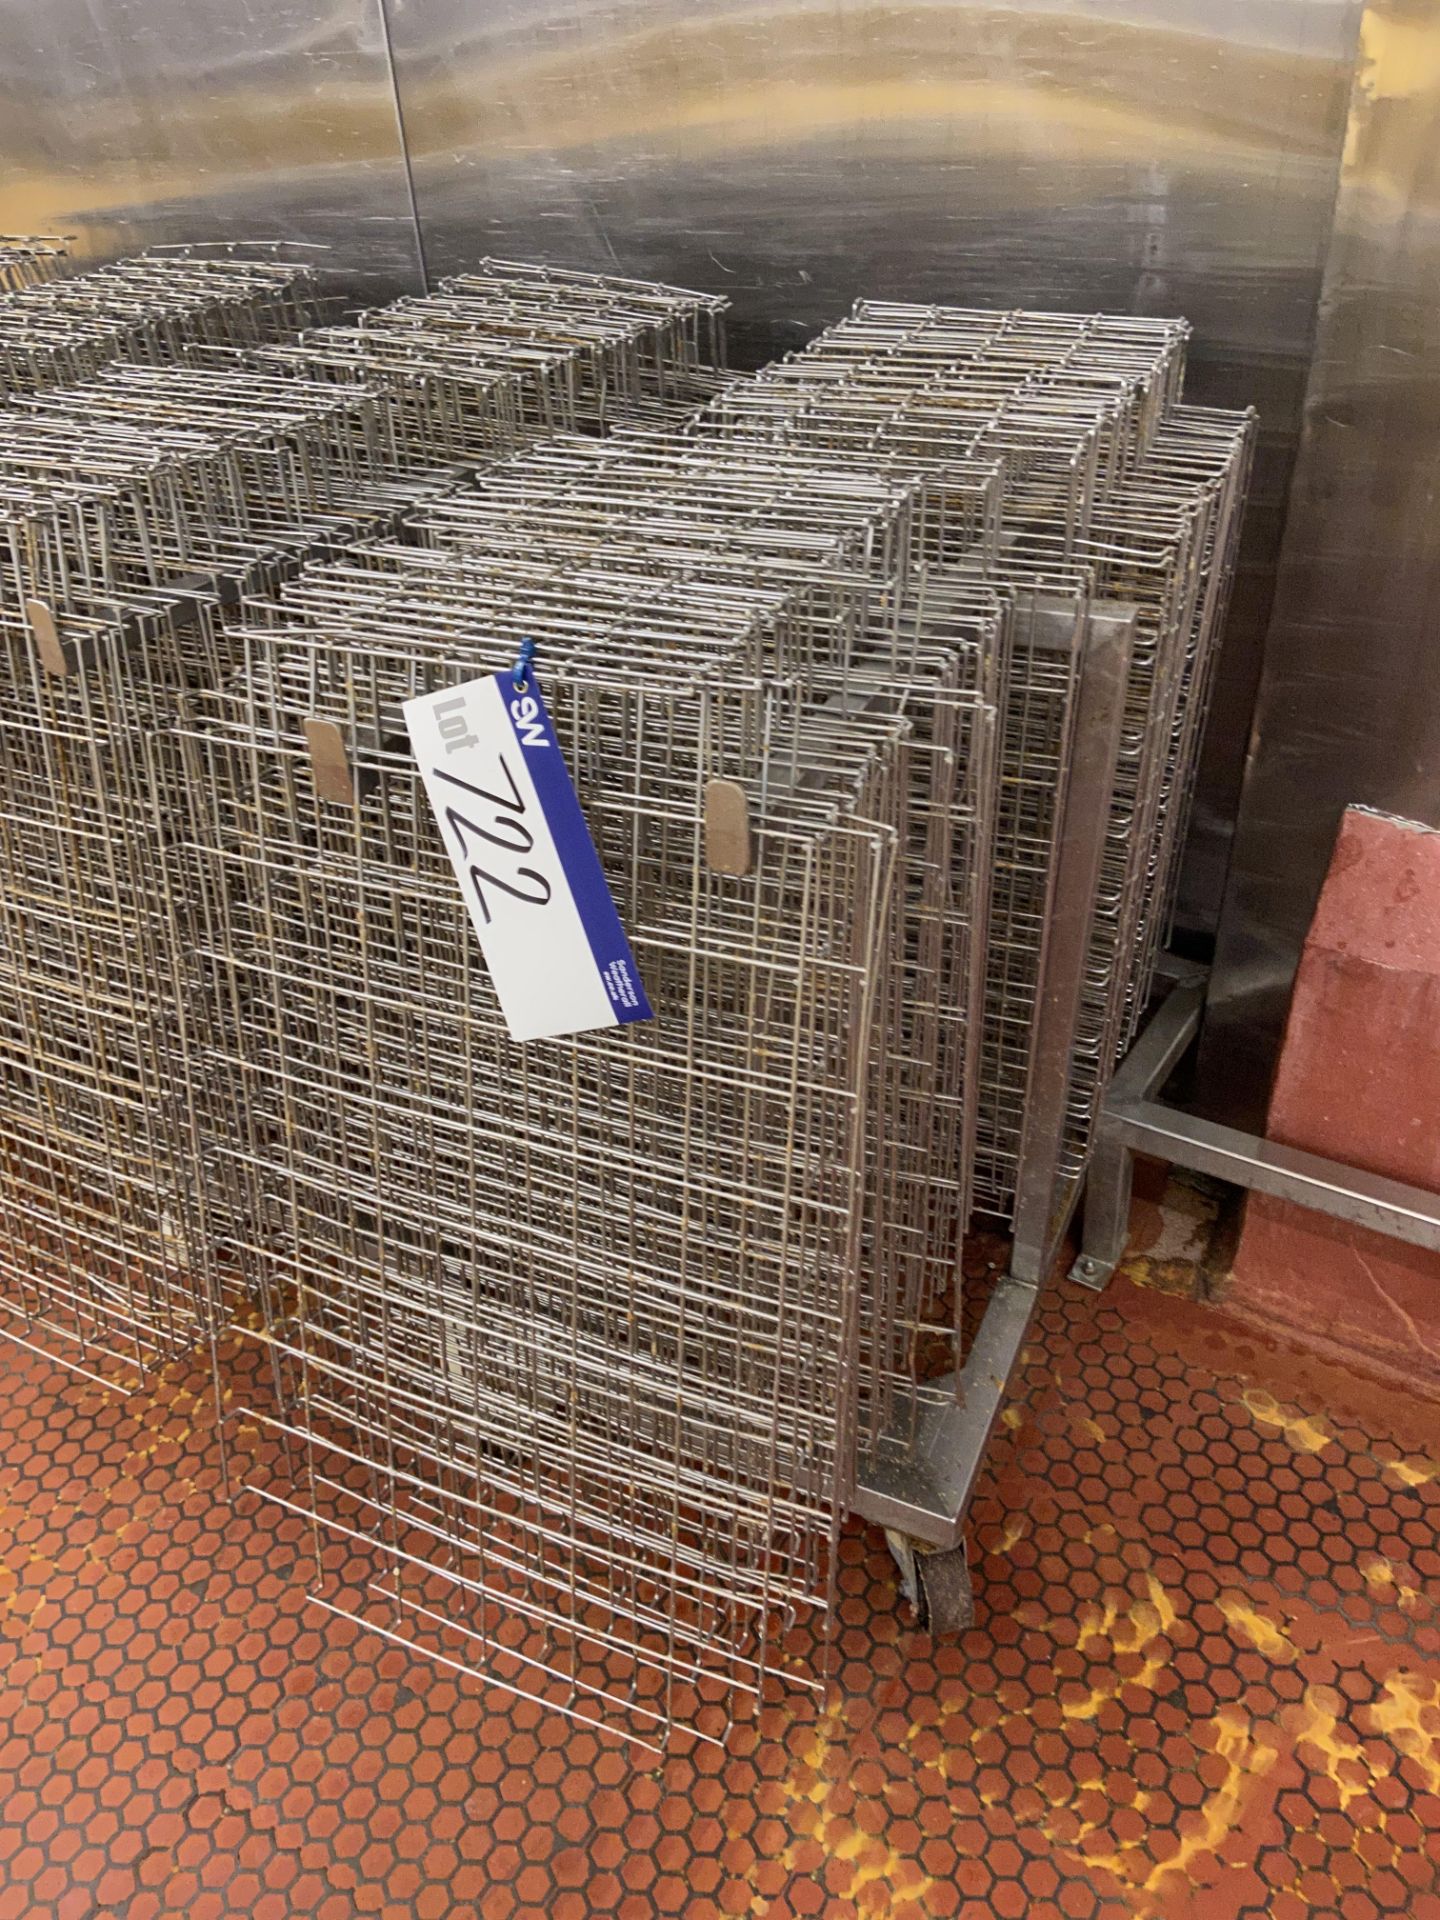 Quantity of Stainless Steel Wire Mesh Baking Trays, with stainless steel trolley, each tray